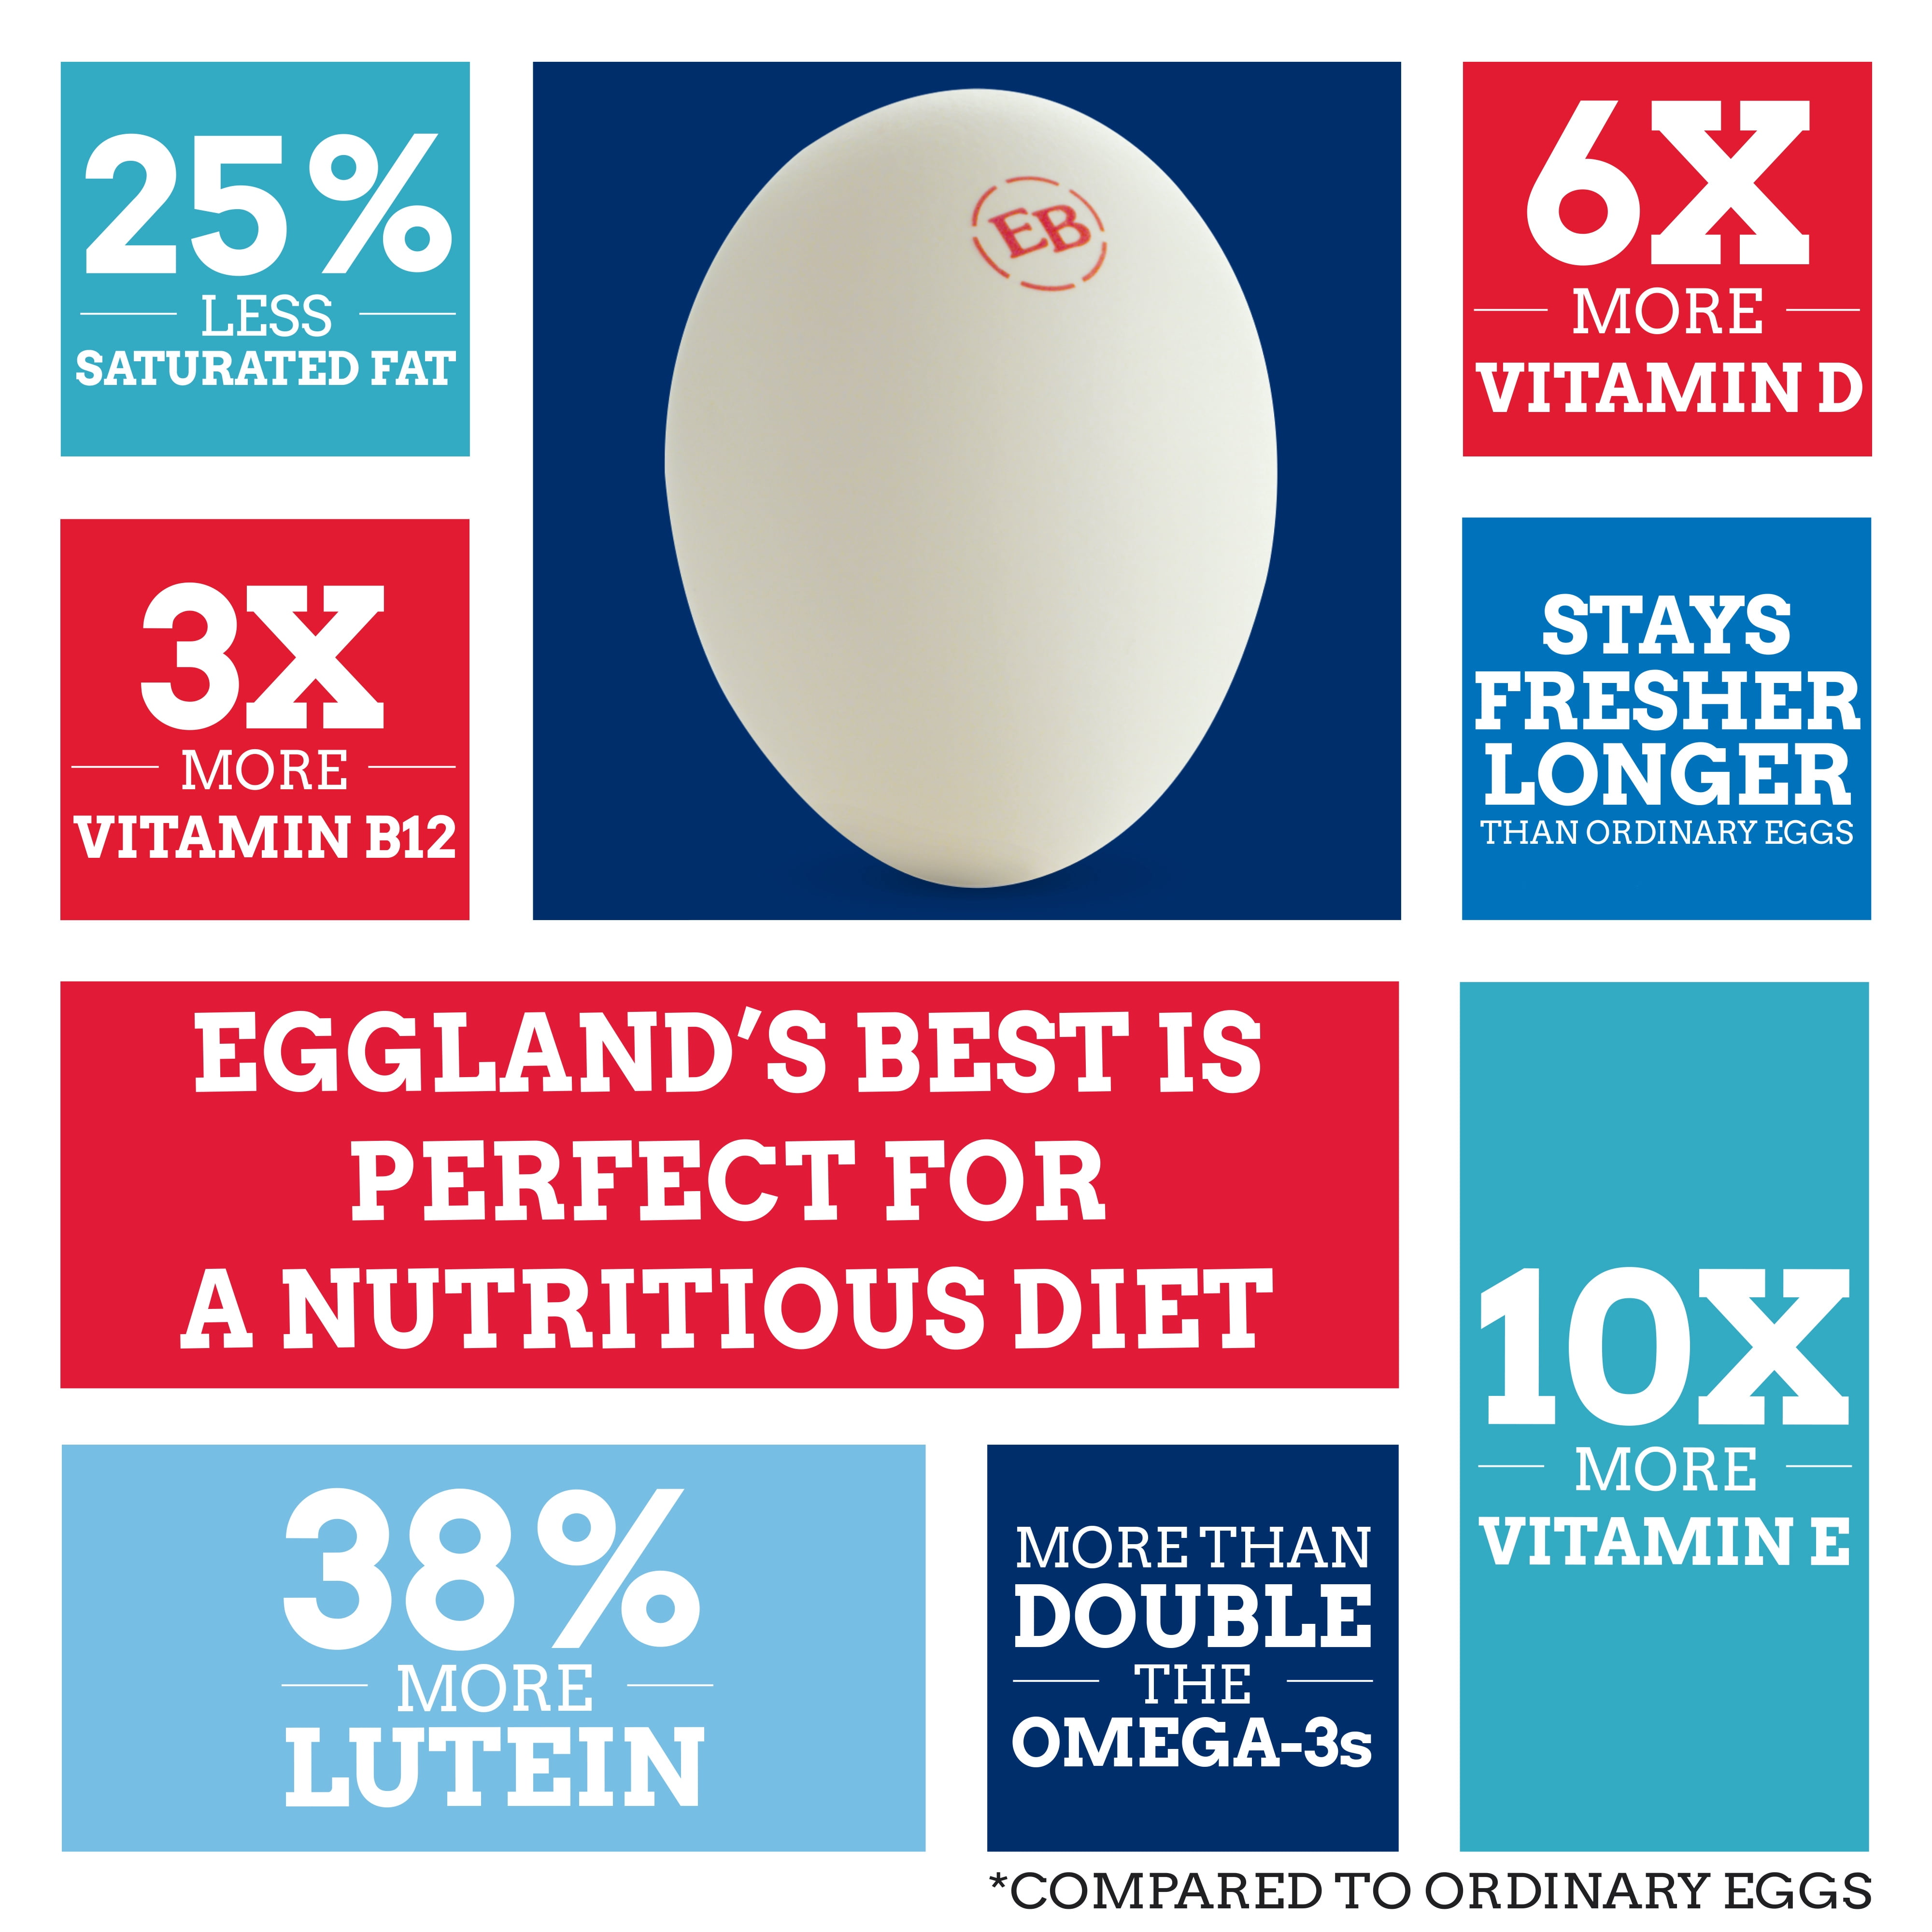 Eggland's Best on X: Why do we stamp our eggs? To ensure you're getting  the quality and nutrition you expect from EB eggs. The ink used is food  safe, so don't worry